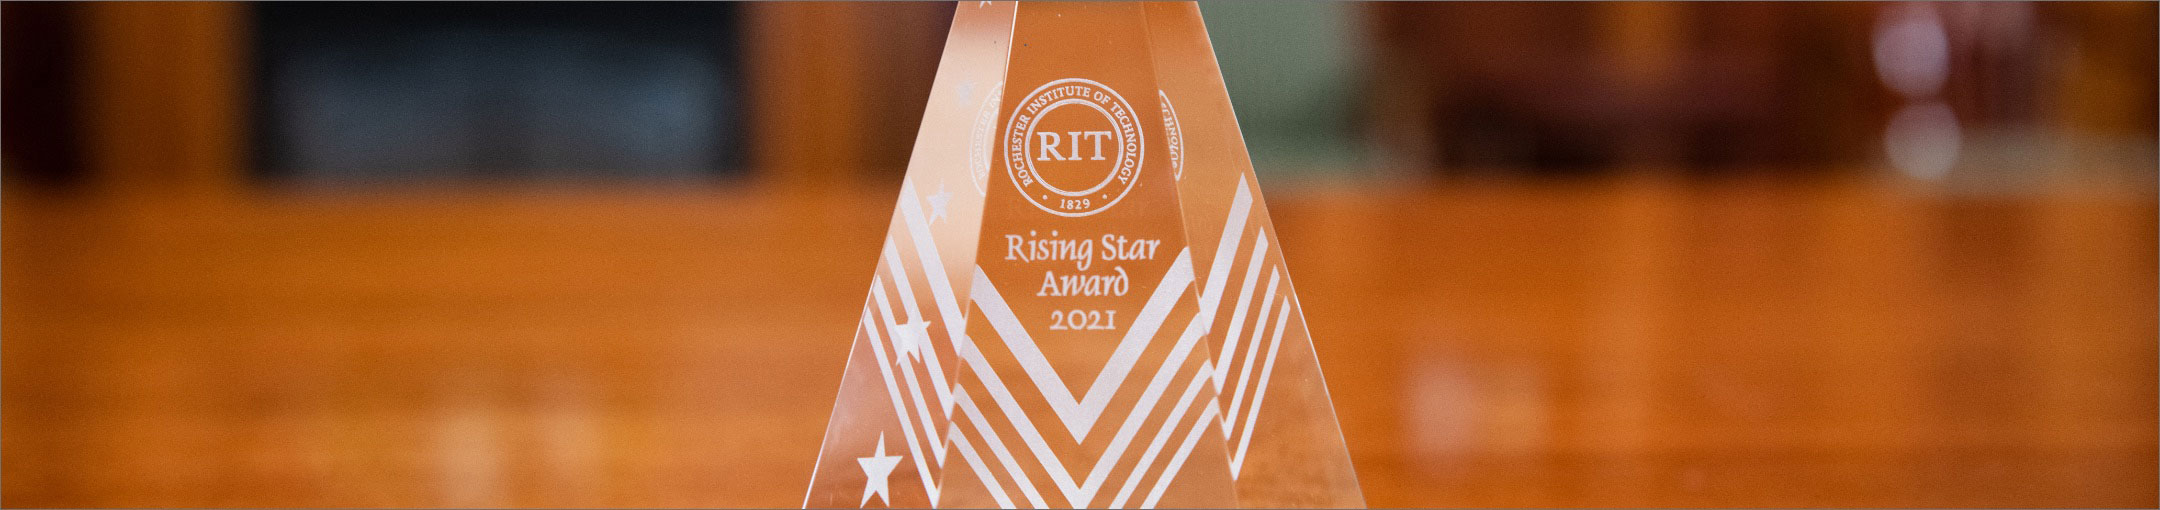 The Rising Star award sitting on a table.